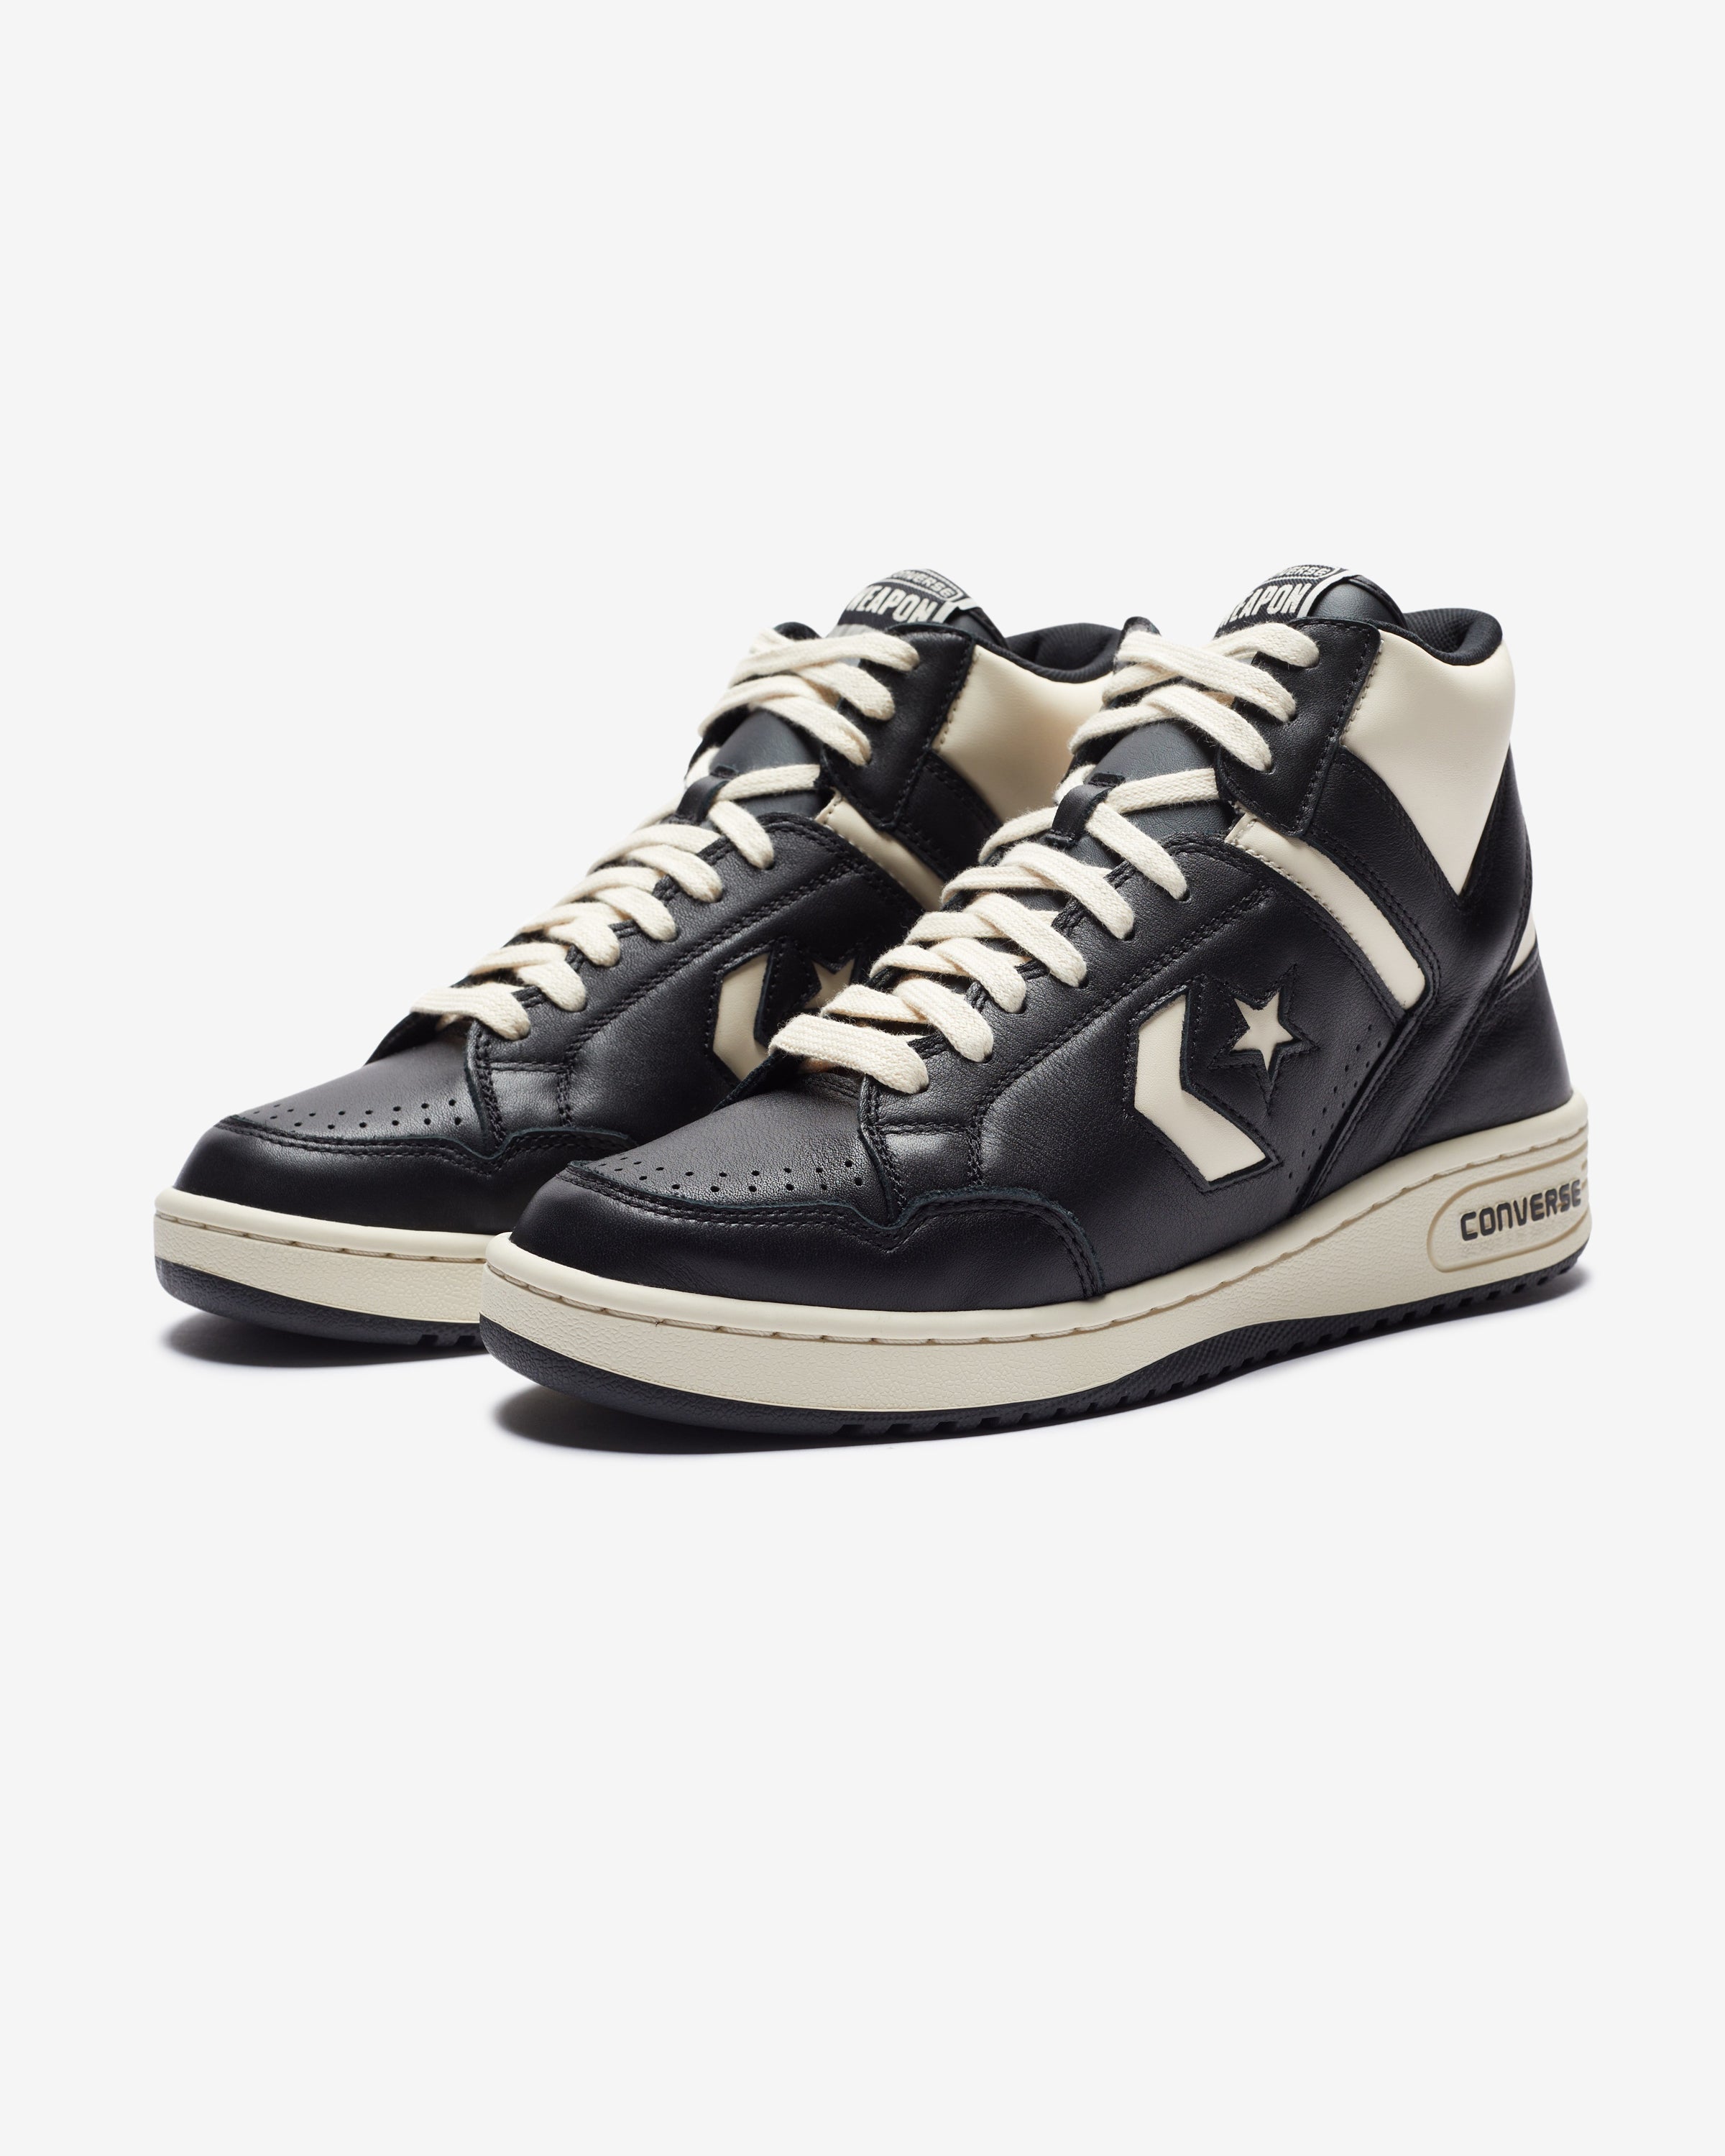 CONVERSE WEAPON MID - BLACK/ NATURALIVORY